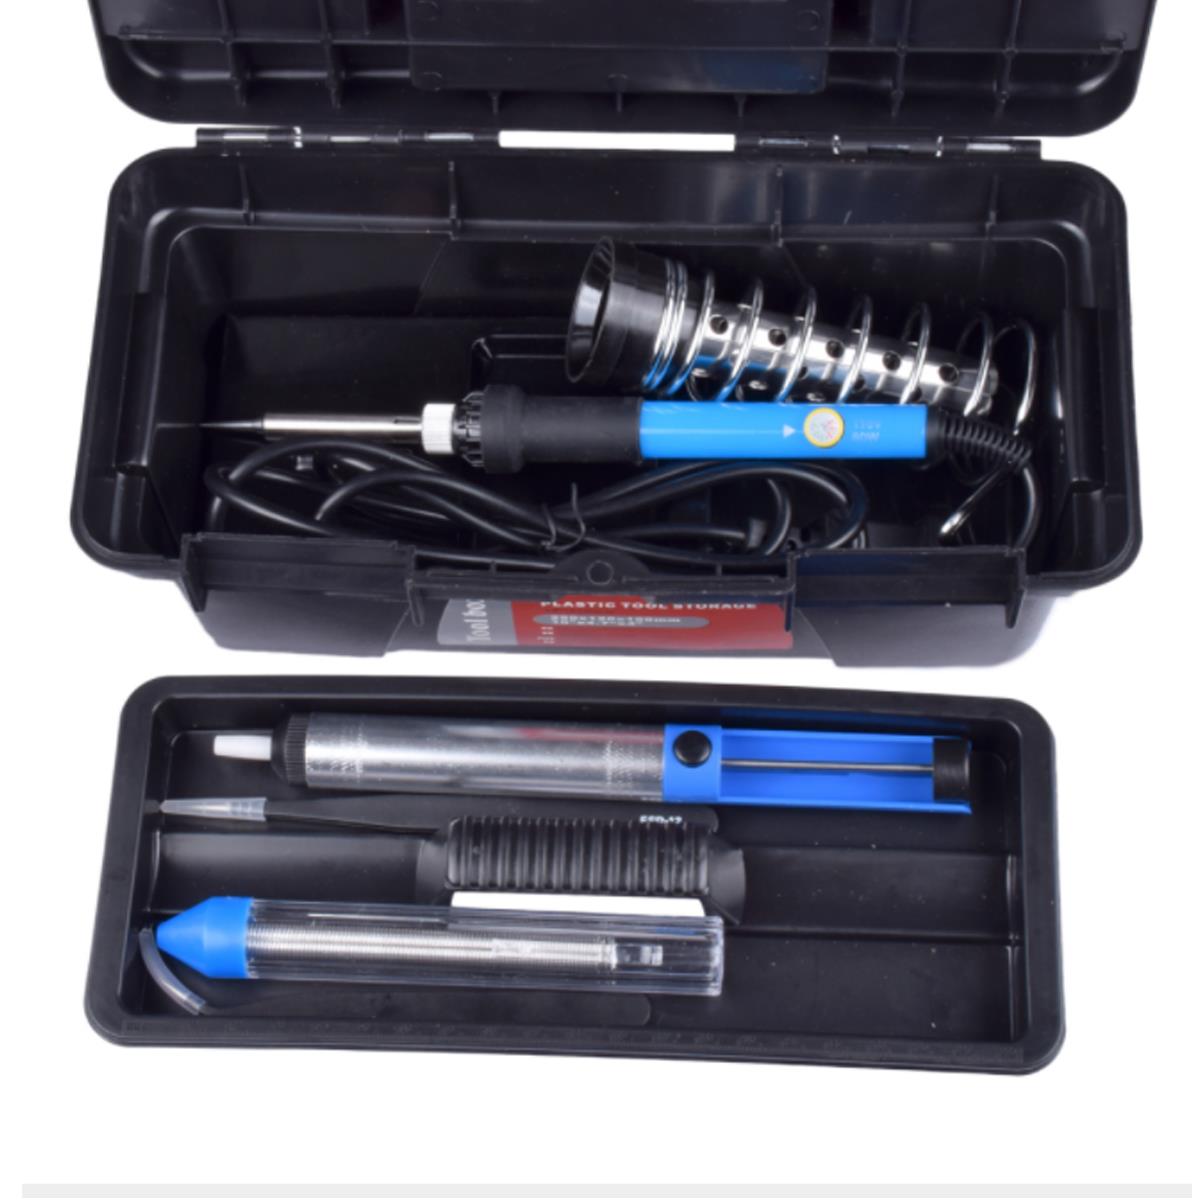 110220V-60W-Adjustable-Temperature-Electric-Welding-Soldering-Tools-Kit-with-Switch-1284249